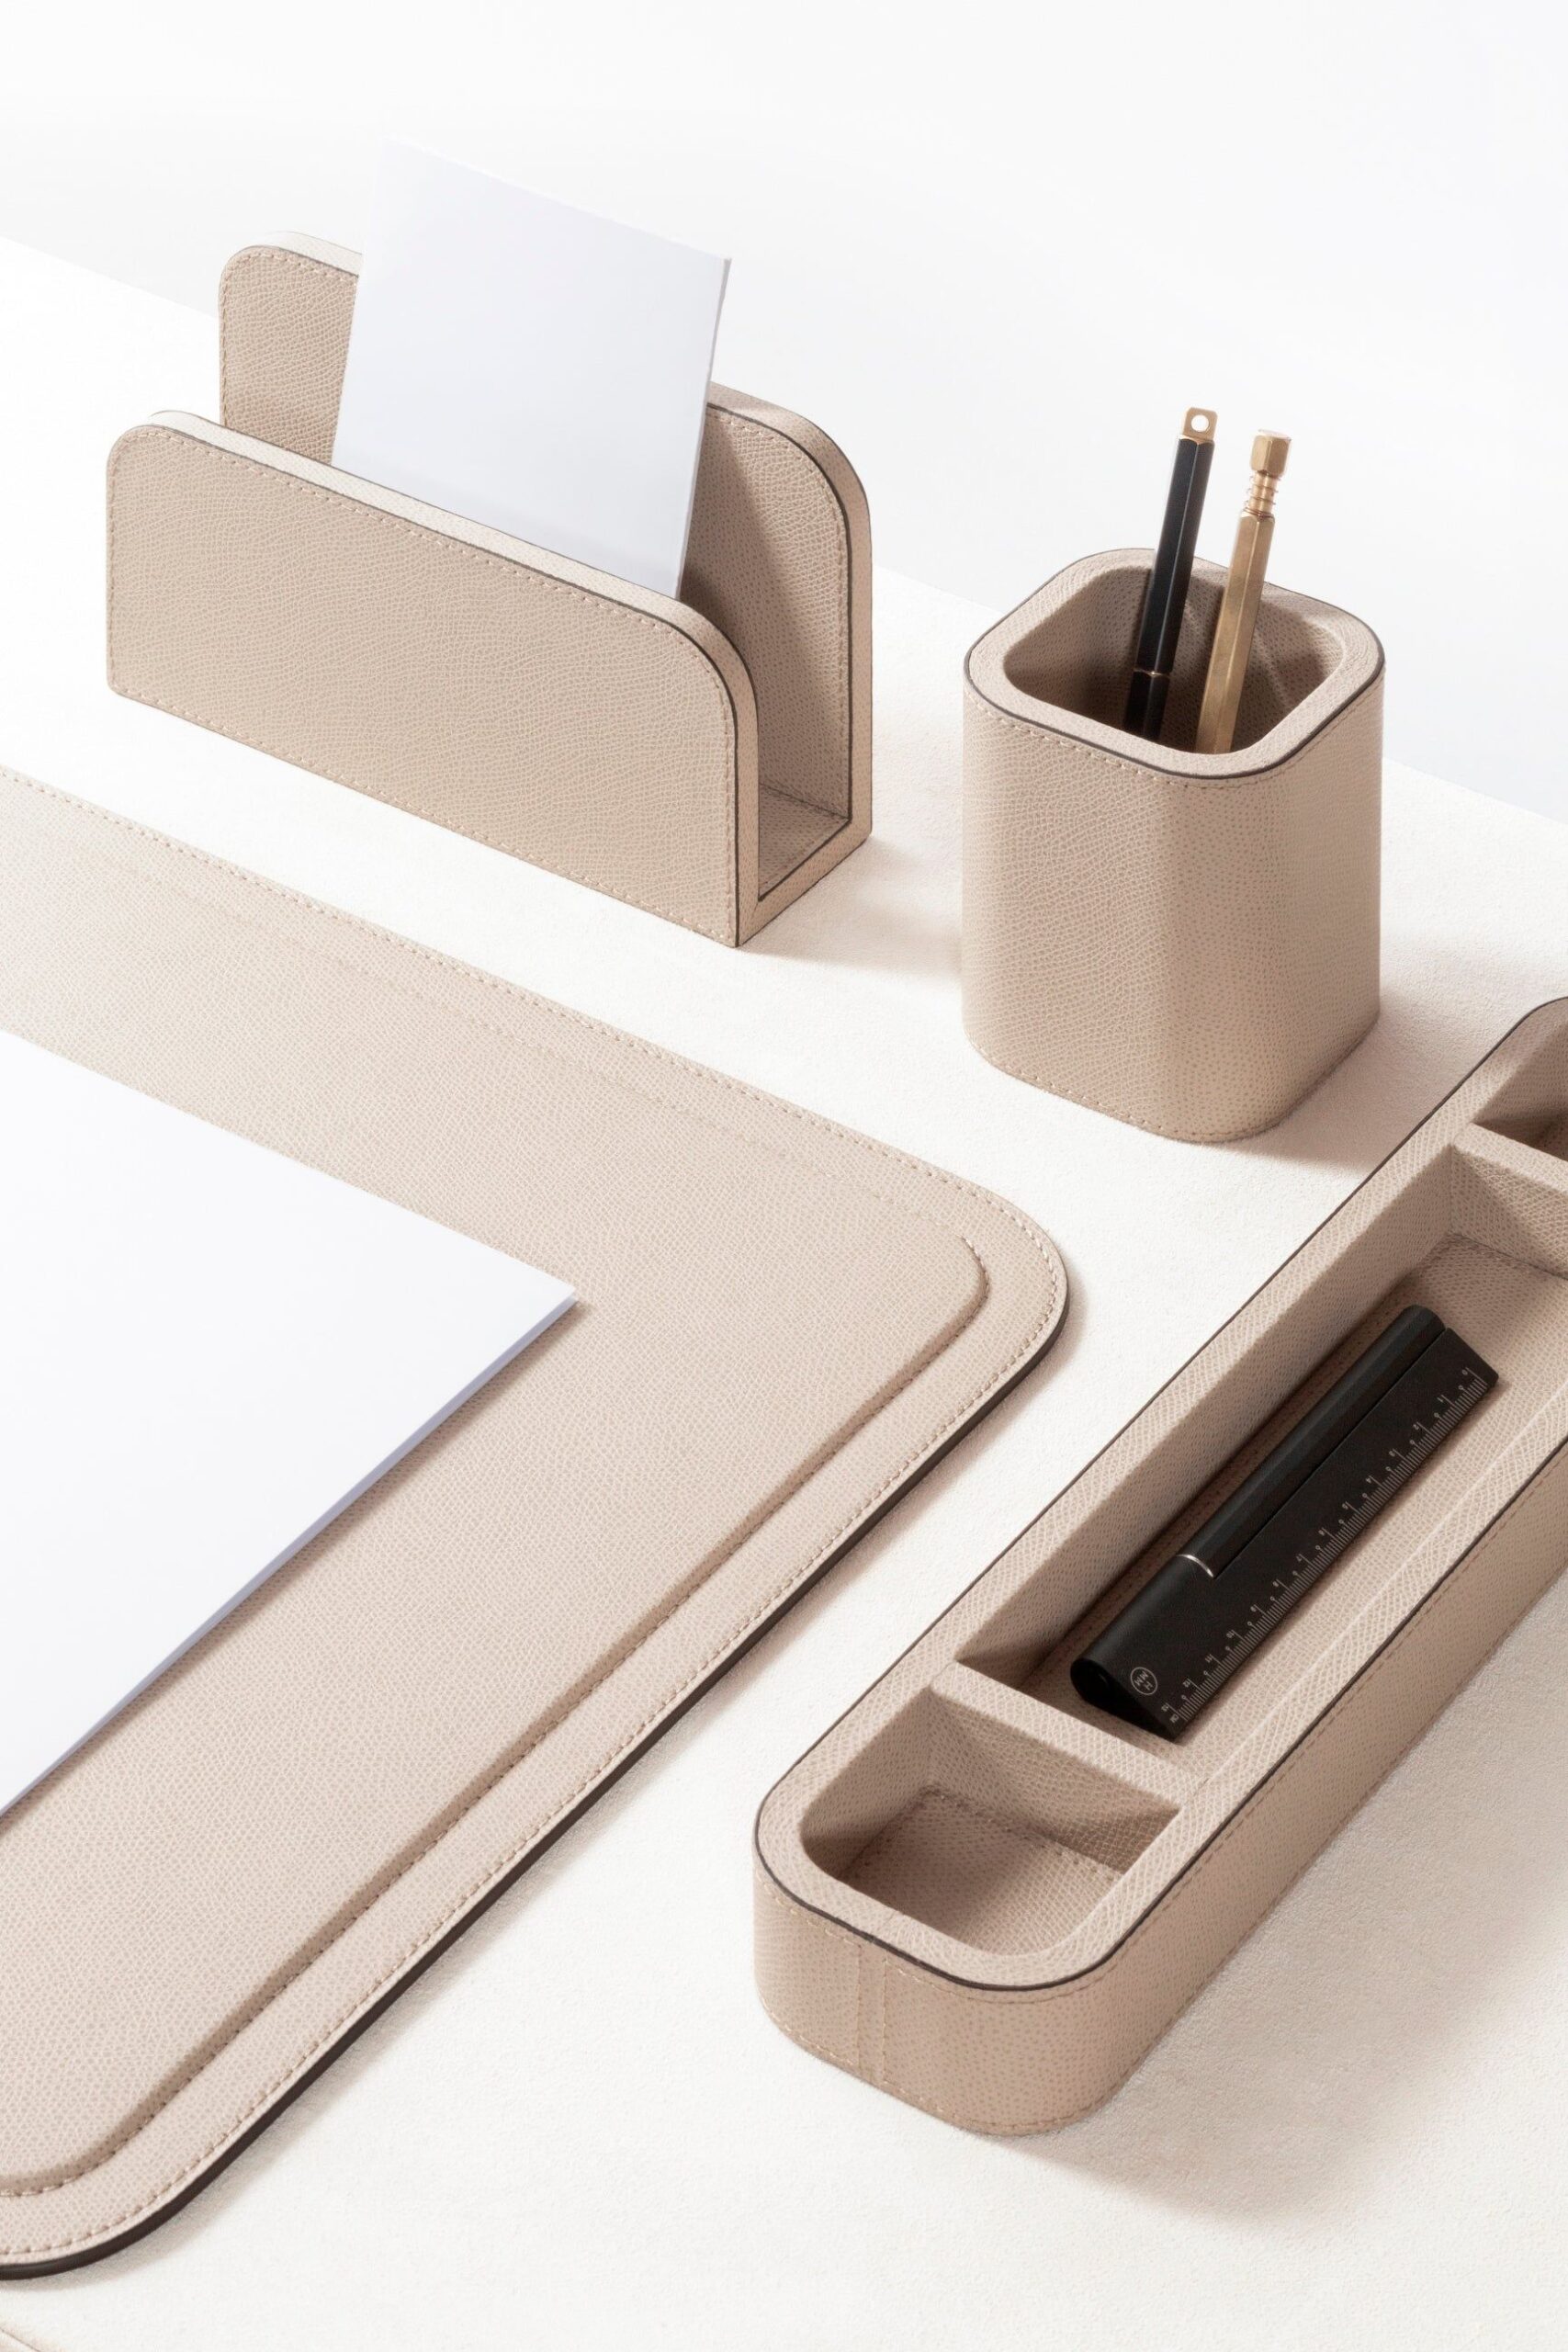 Must-Have Executive Desk Accessories for a Stylish and Organized Workspace